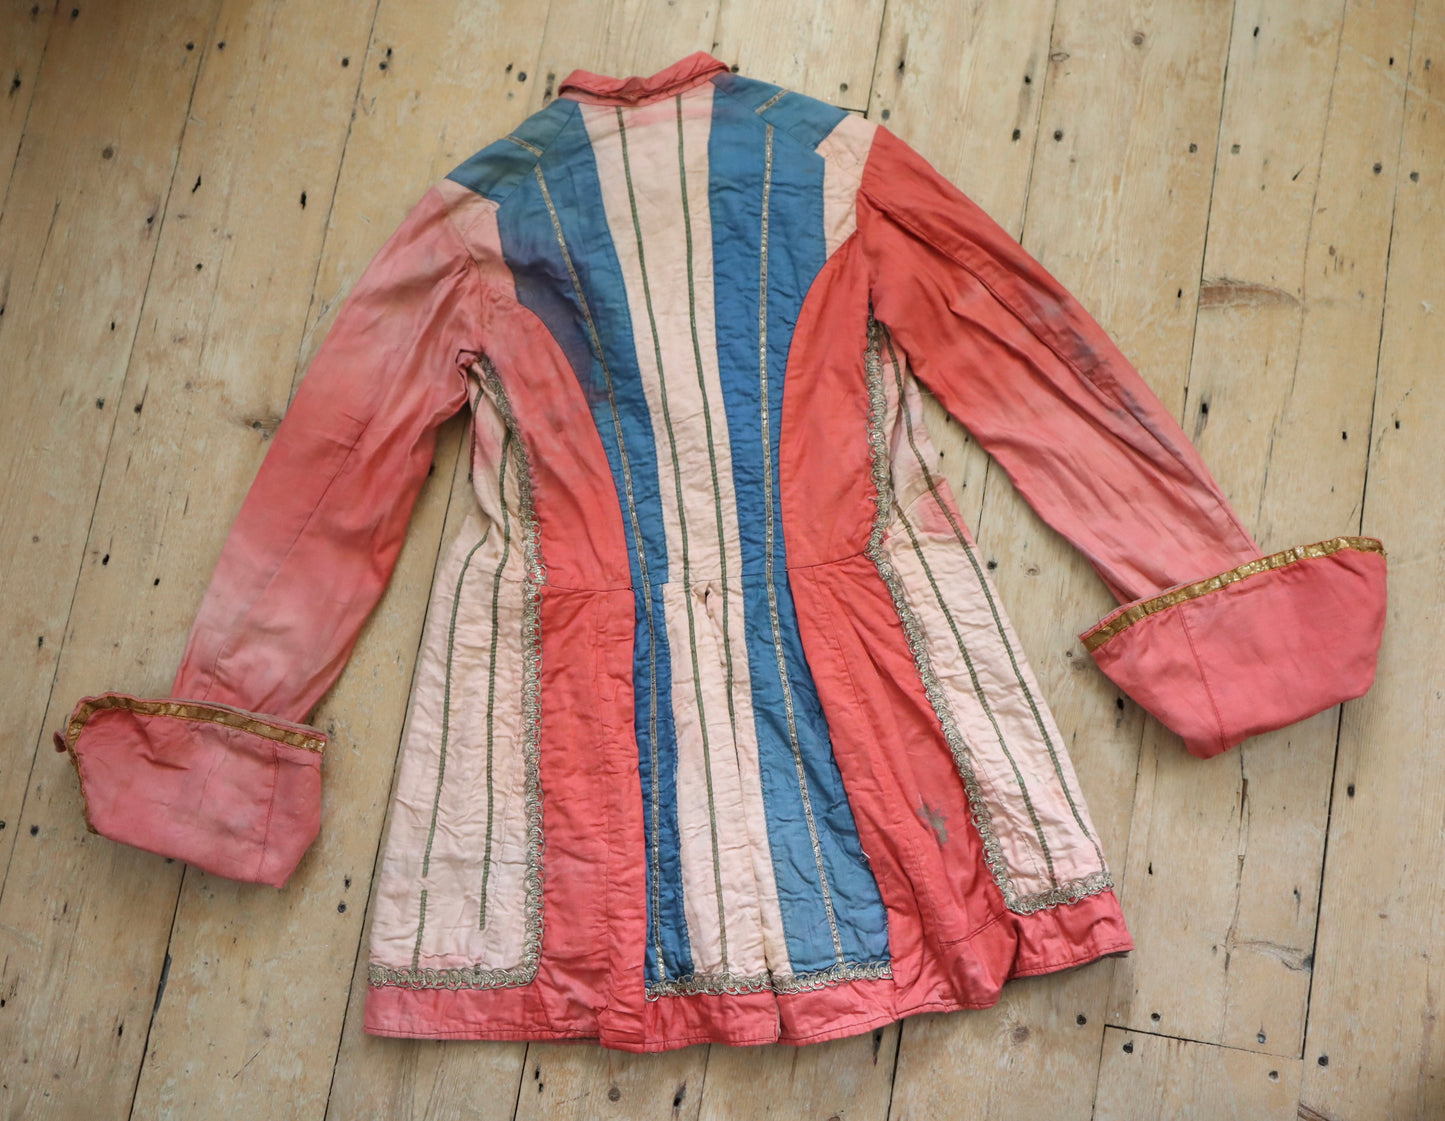 Antique 19th century French theatre Opera costume 18th century style frockcoat jacket red white blue fade silver metal ribbon trim striped